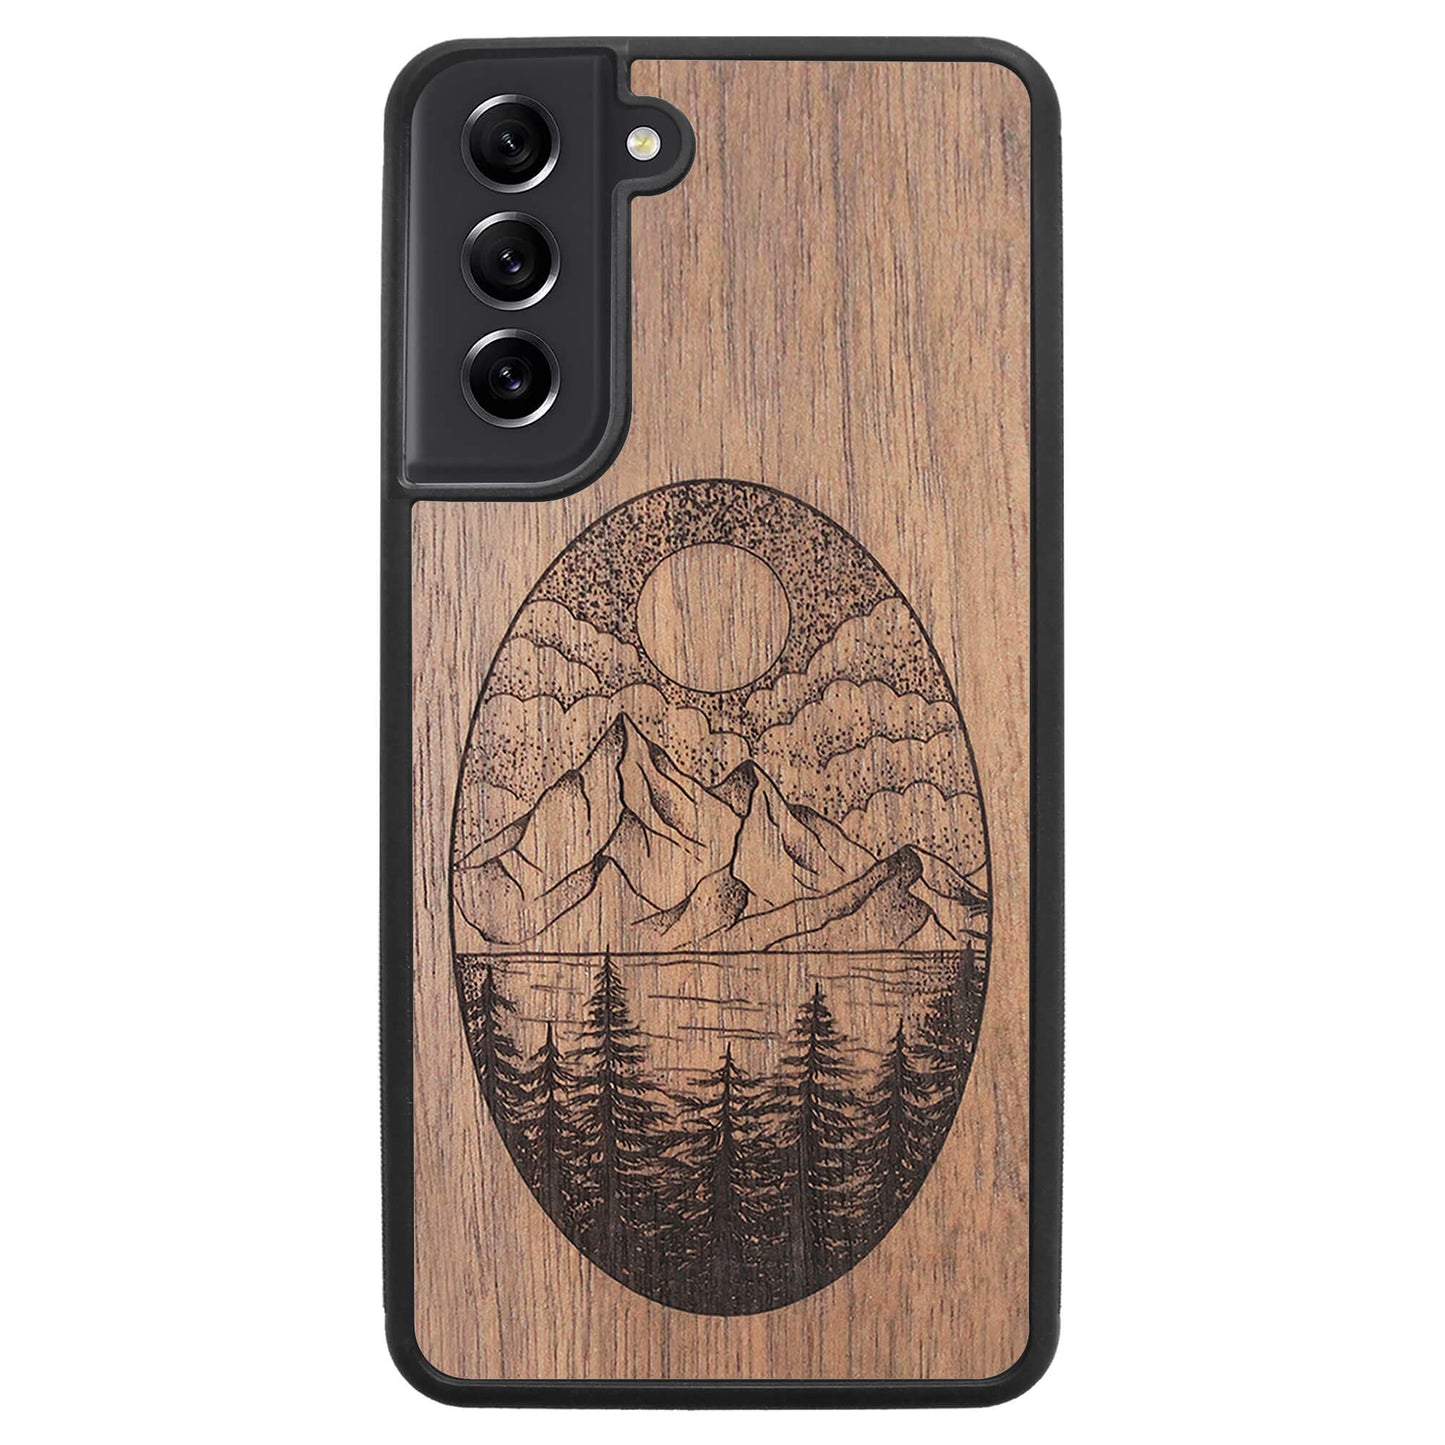 Wooden Case for Samsung Galaxy S21 FE Landscape